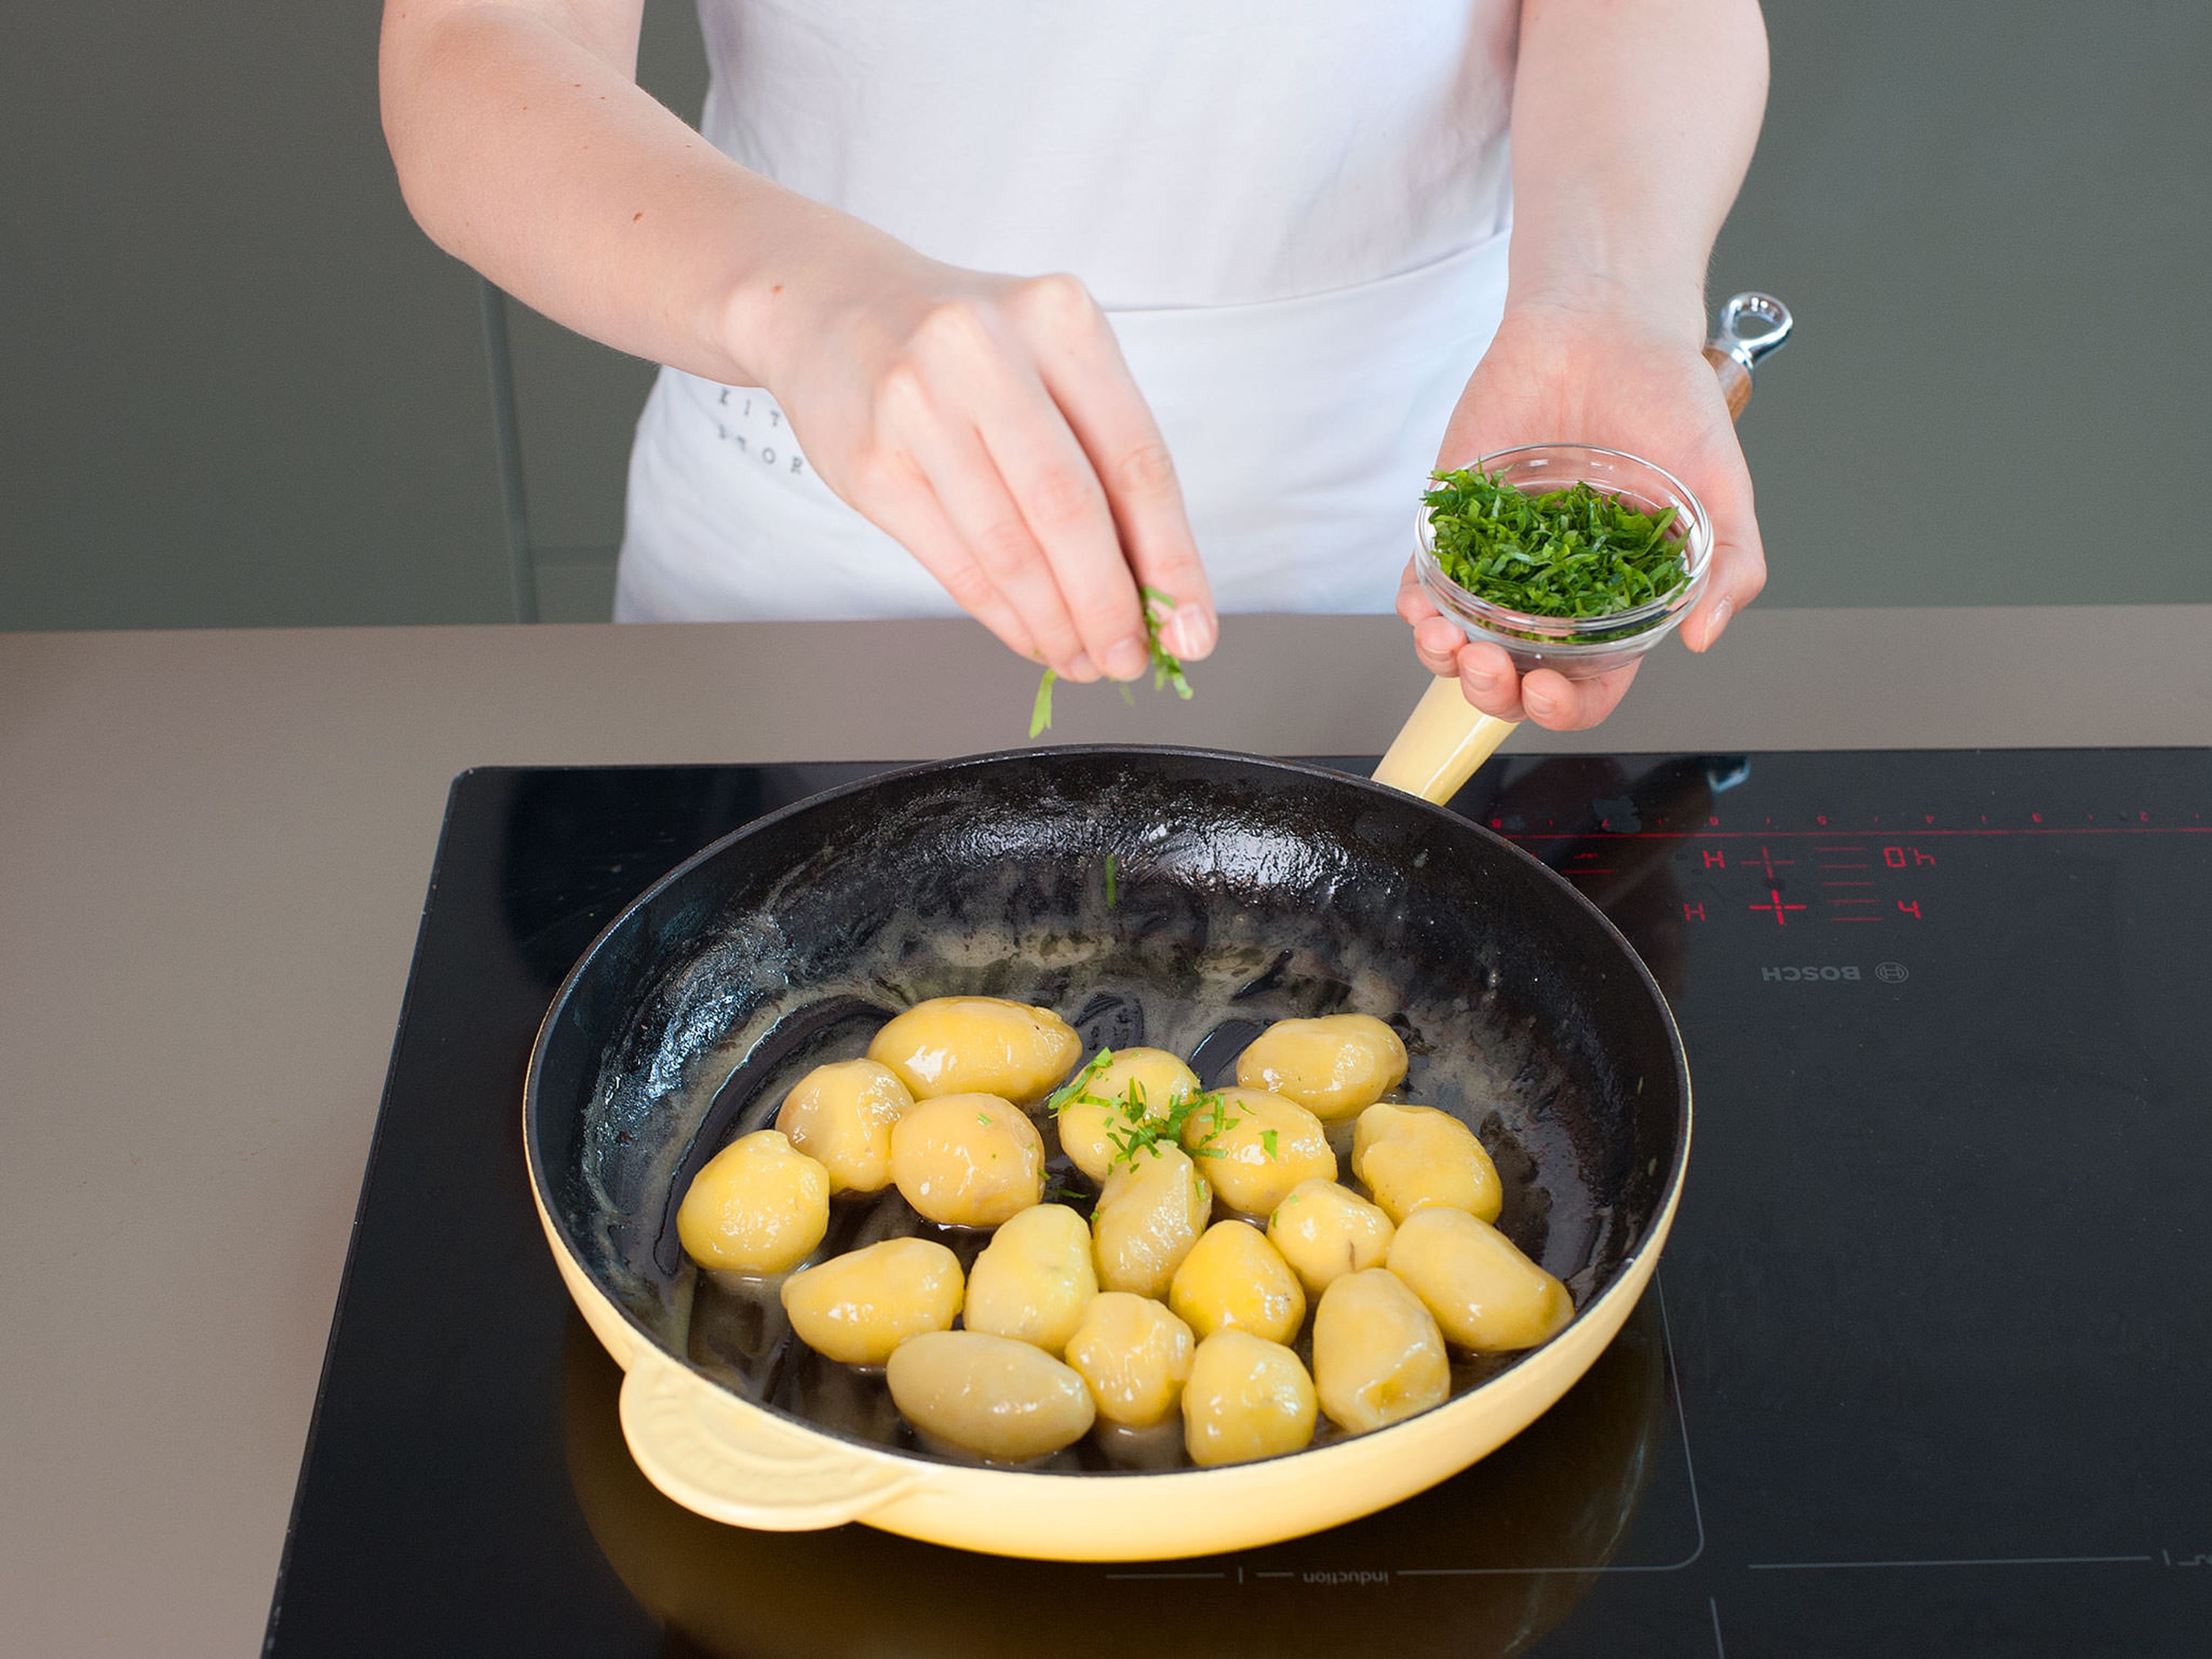 In a large saucepan, cook potatoes in salted water over medium heat, approx. 10 - 15 min. Drain and peel potatoes, then return to pan and sauté in half the butter and some veal stock,  approx. 3 - 5 min. Remove from heat, cover, and set aside. Add freshly chopped parsley right before serving.